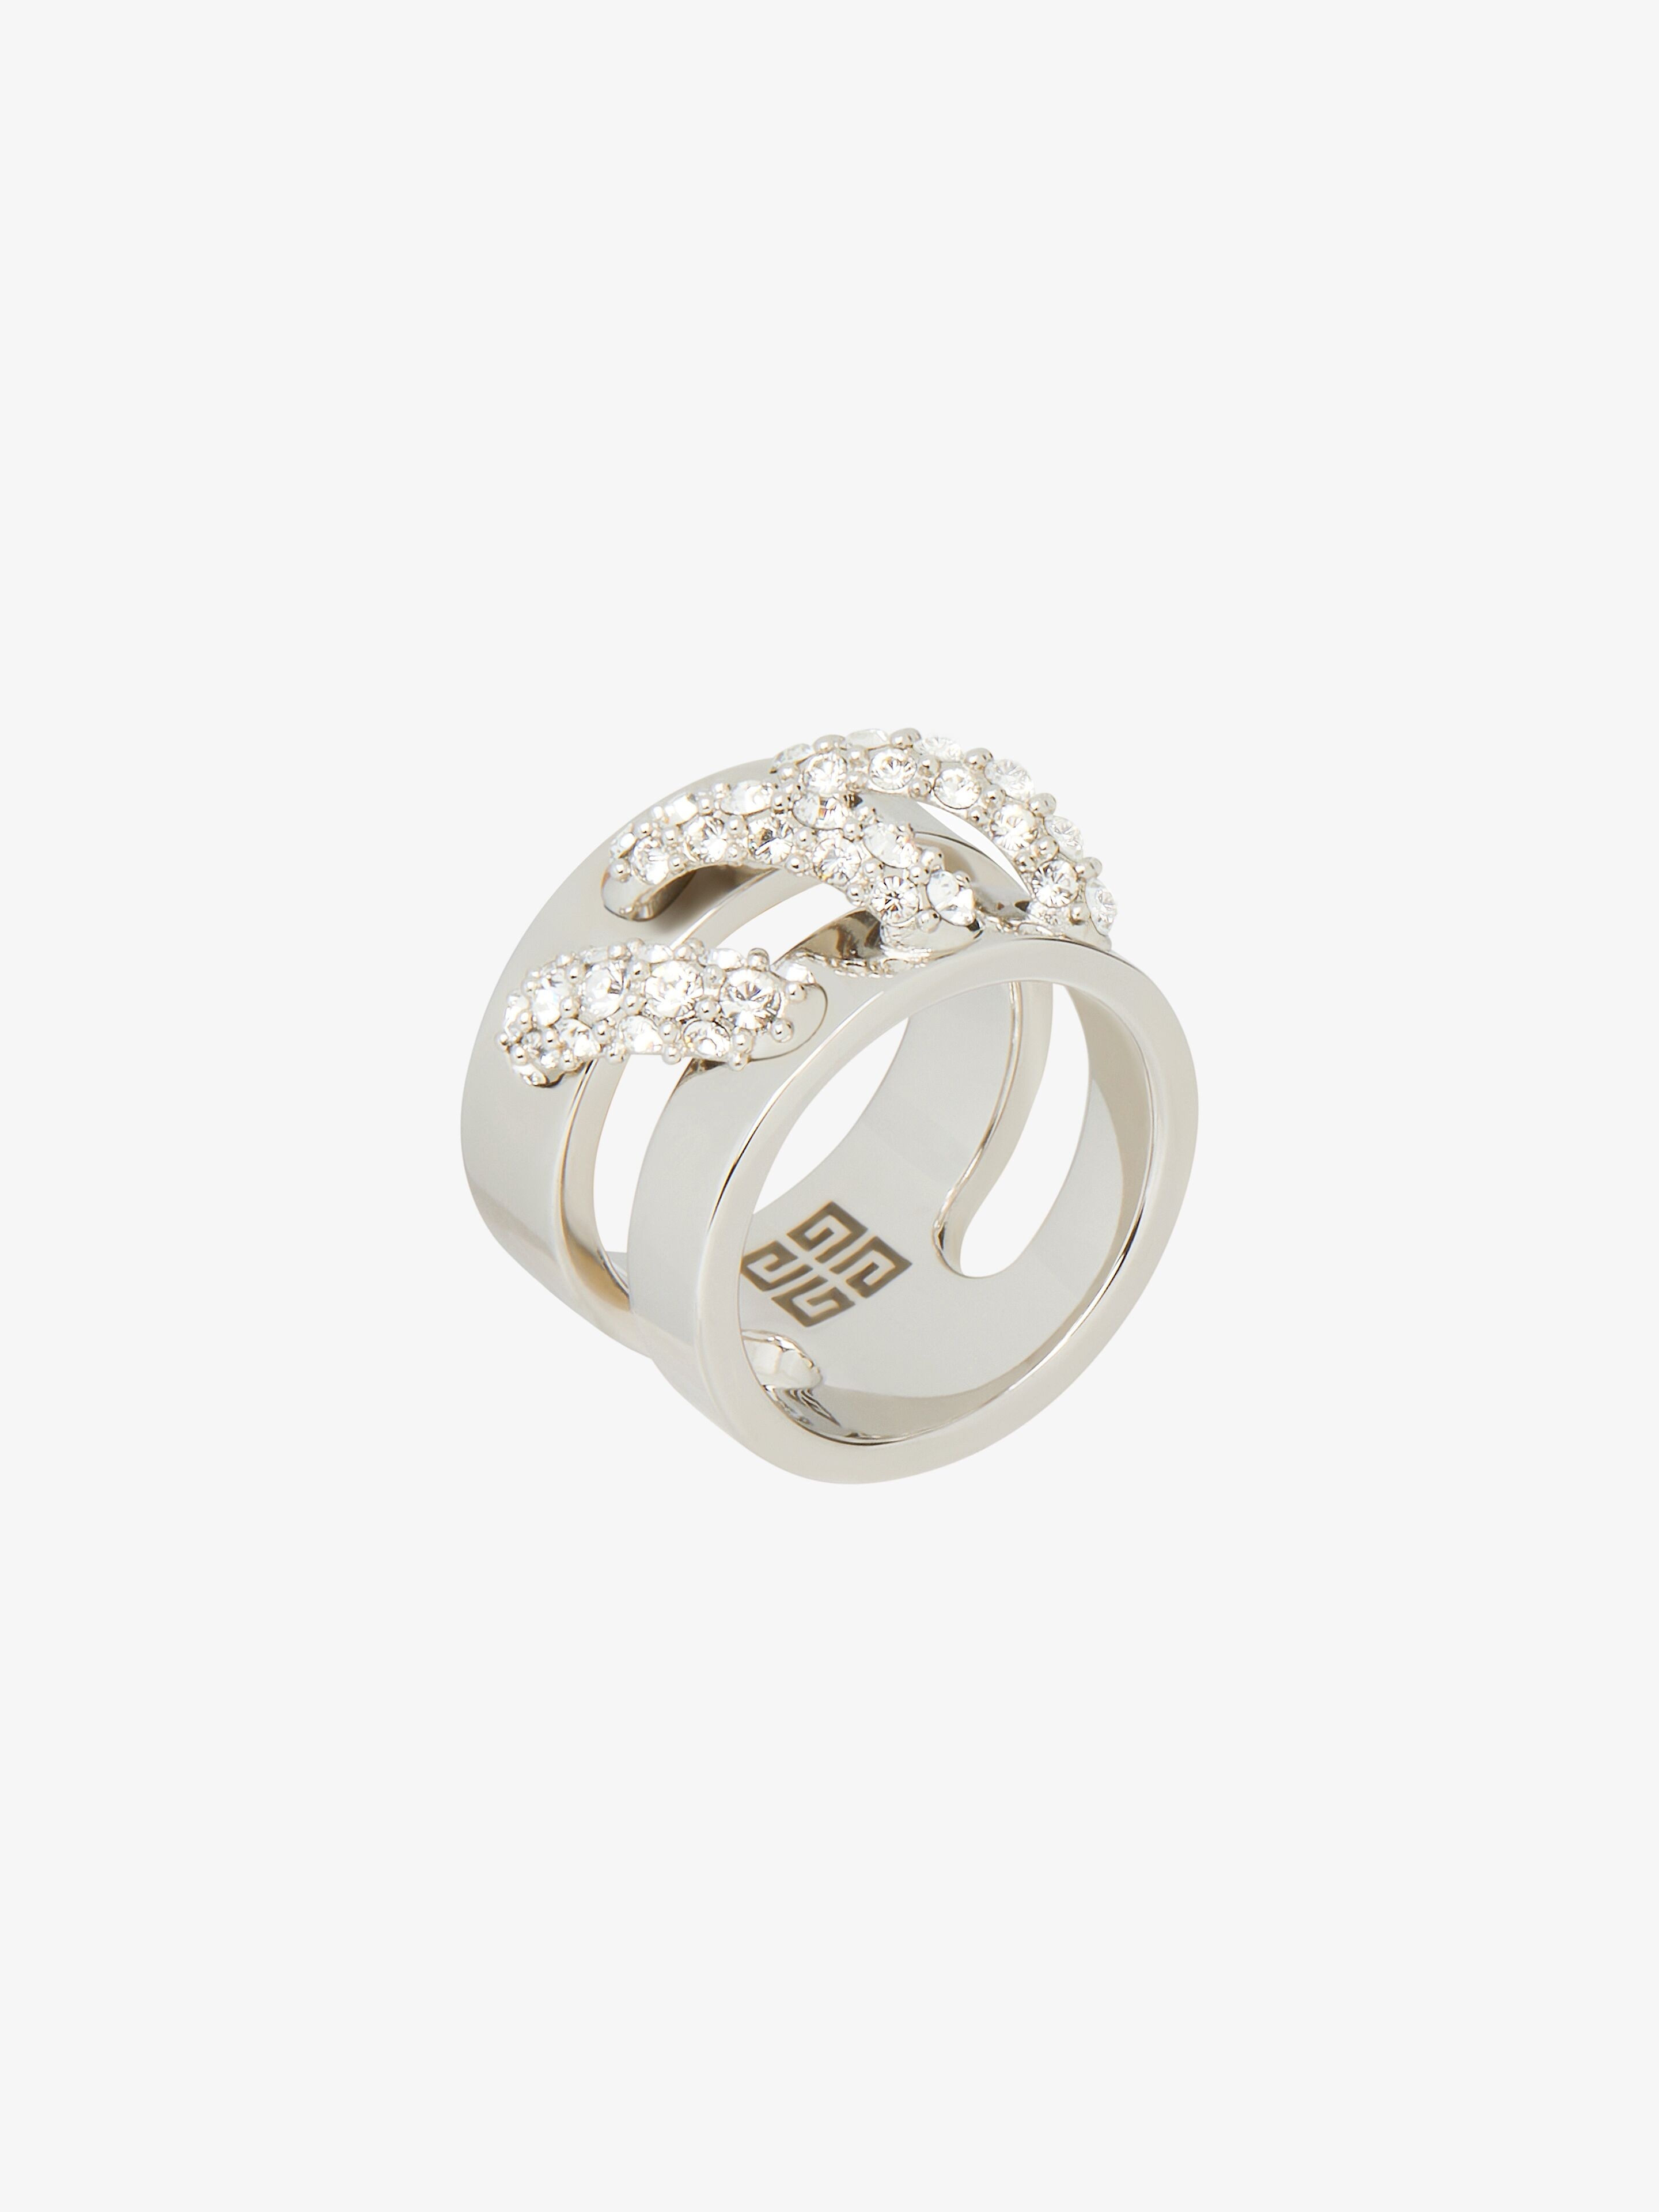 Givenchy STITCH RING IN METAL WITH CRYSTALS